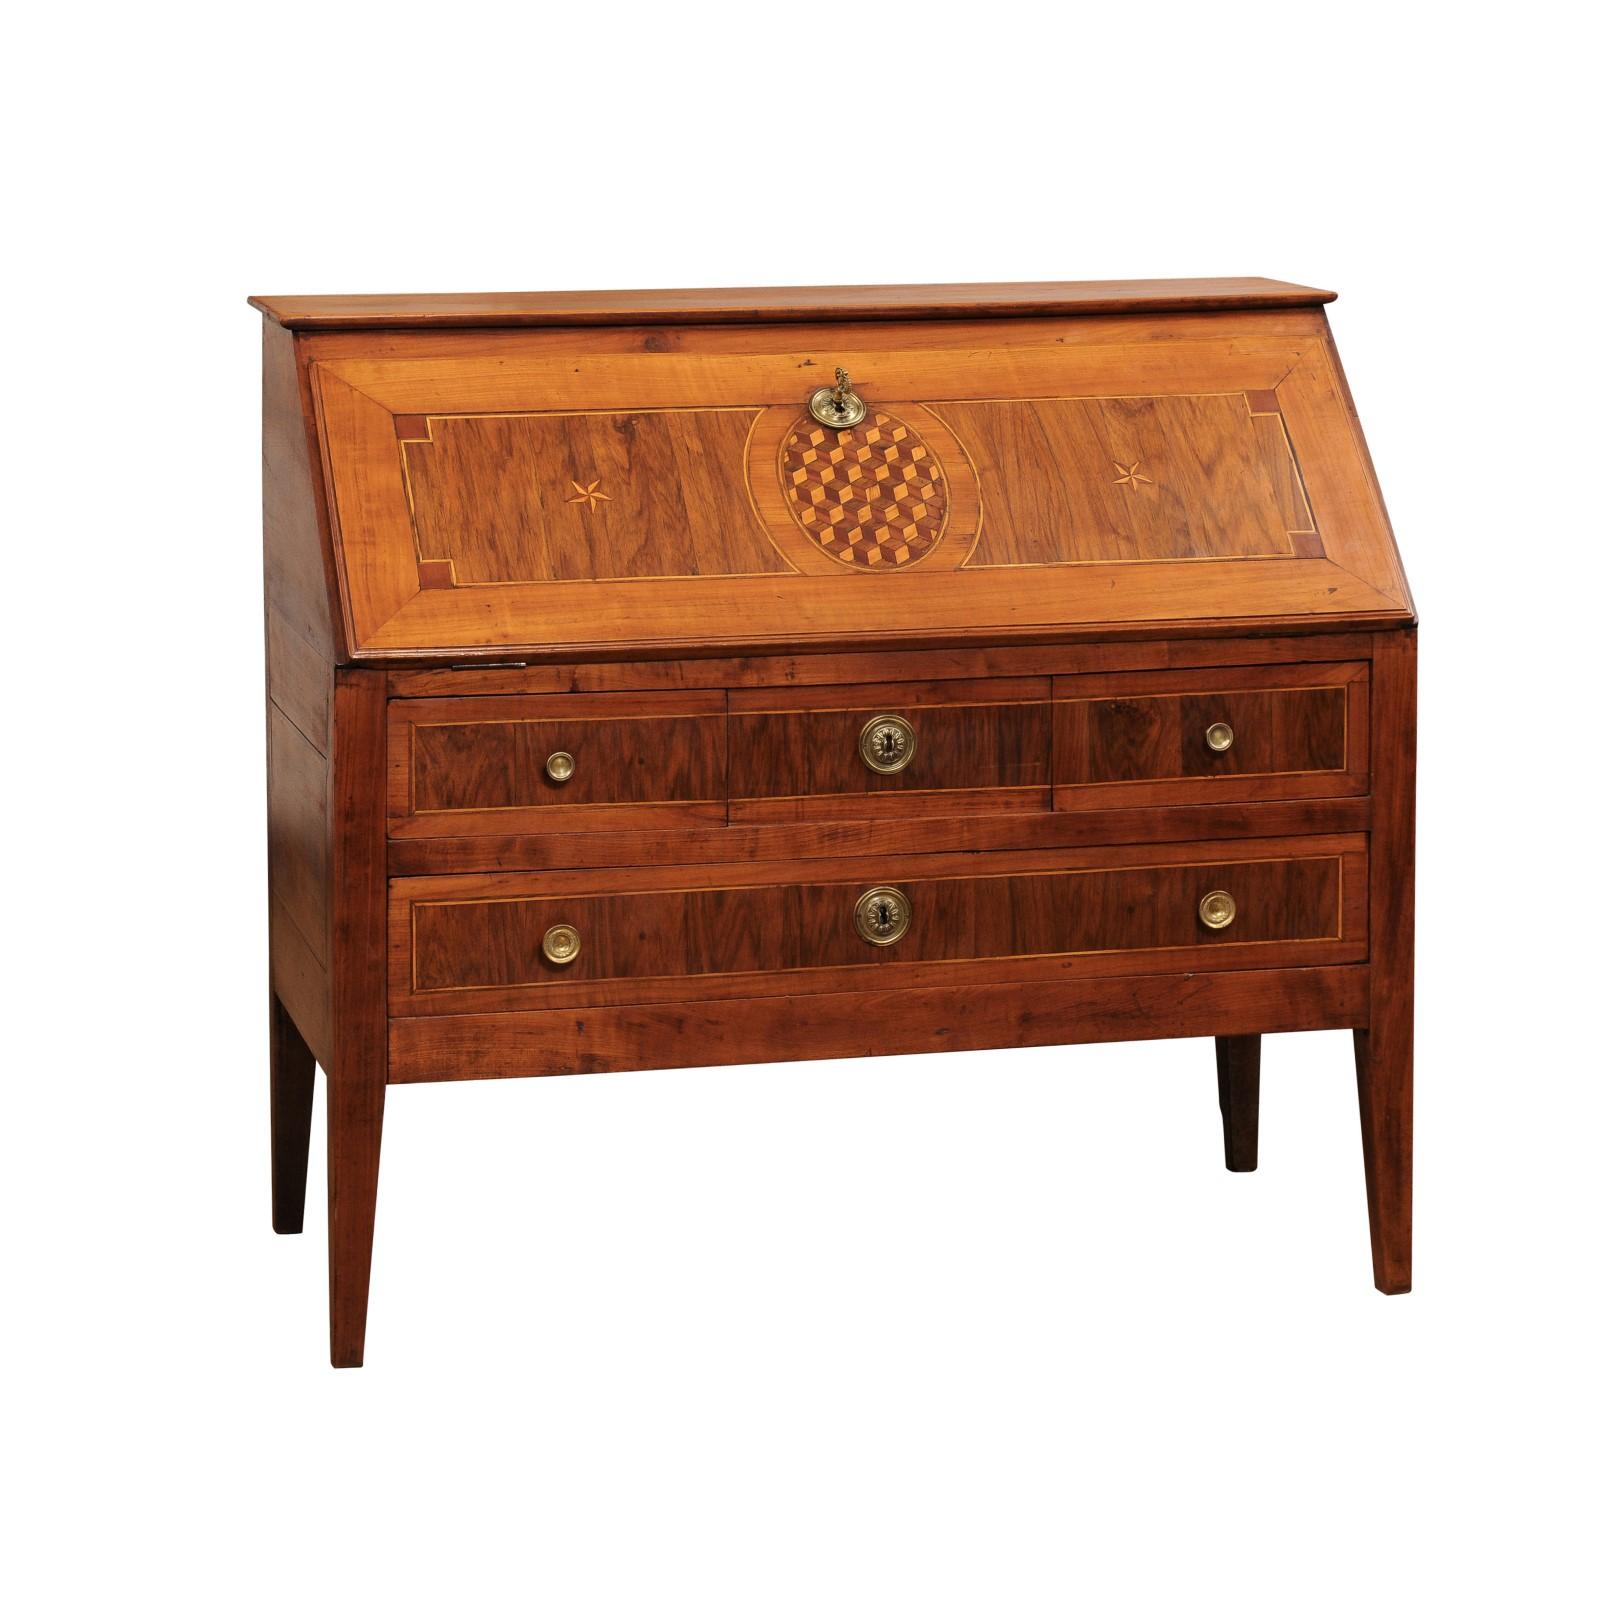 A French Louis XVI period walnut and cherry slant front desk from the late 18th century, with marquetry décor, drawers and fine details. Created in France during the last decade of the 18th century, this secretary features a narrow rectangular top